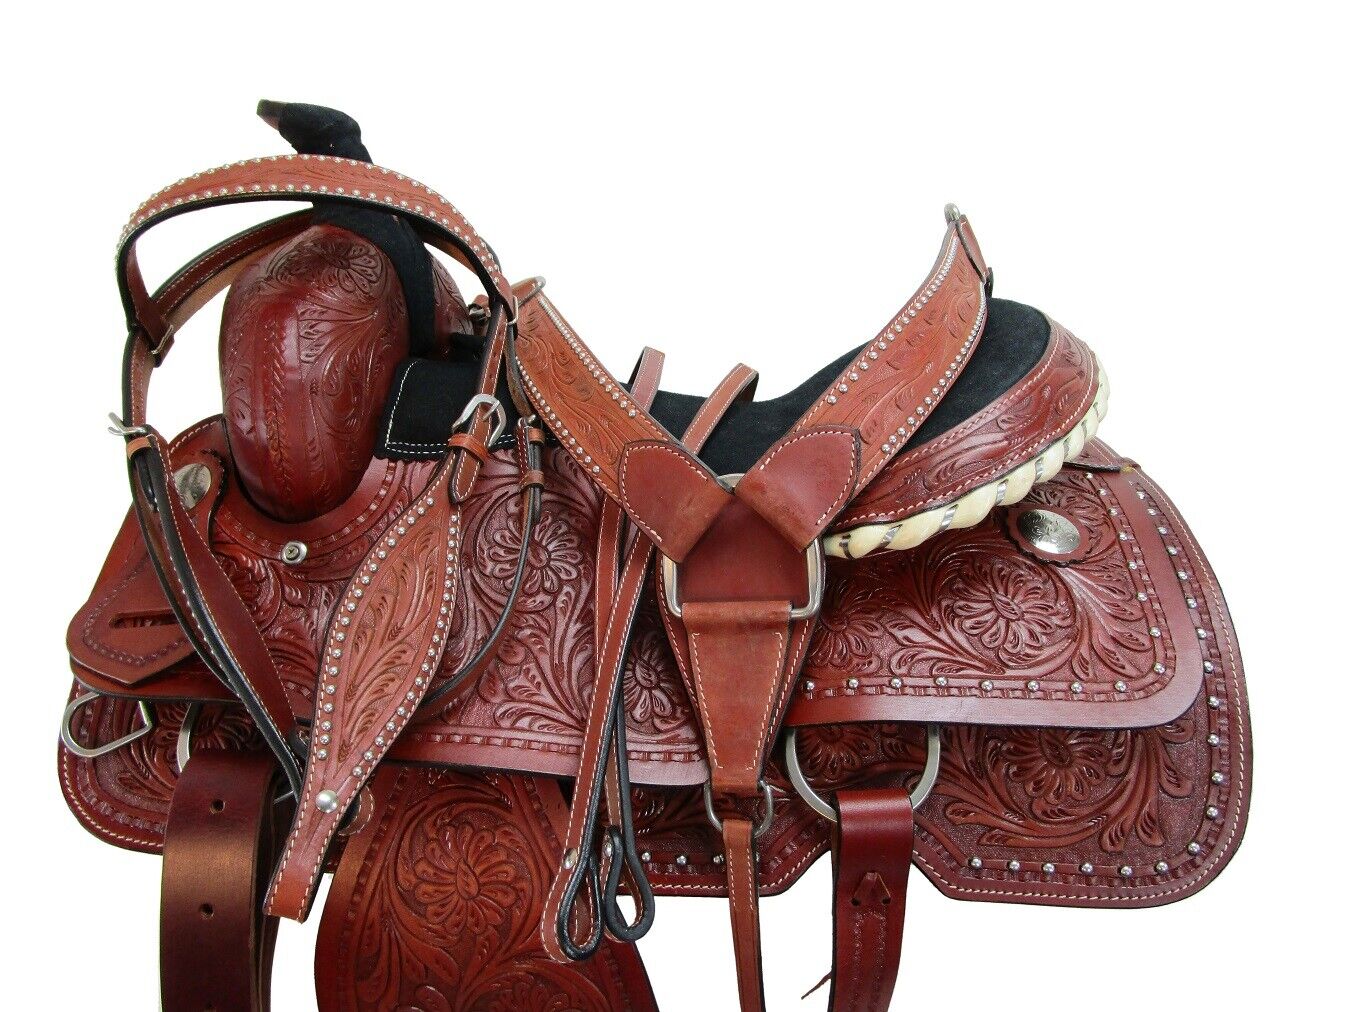 Details about   USED HORSE SADDLE ROPING RANCH TRAIL RANCHER BASKET WEAVE TOOLED LEATHER 17 16